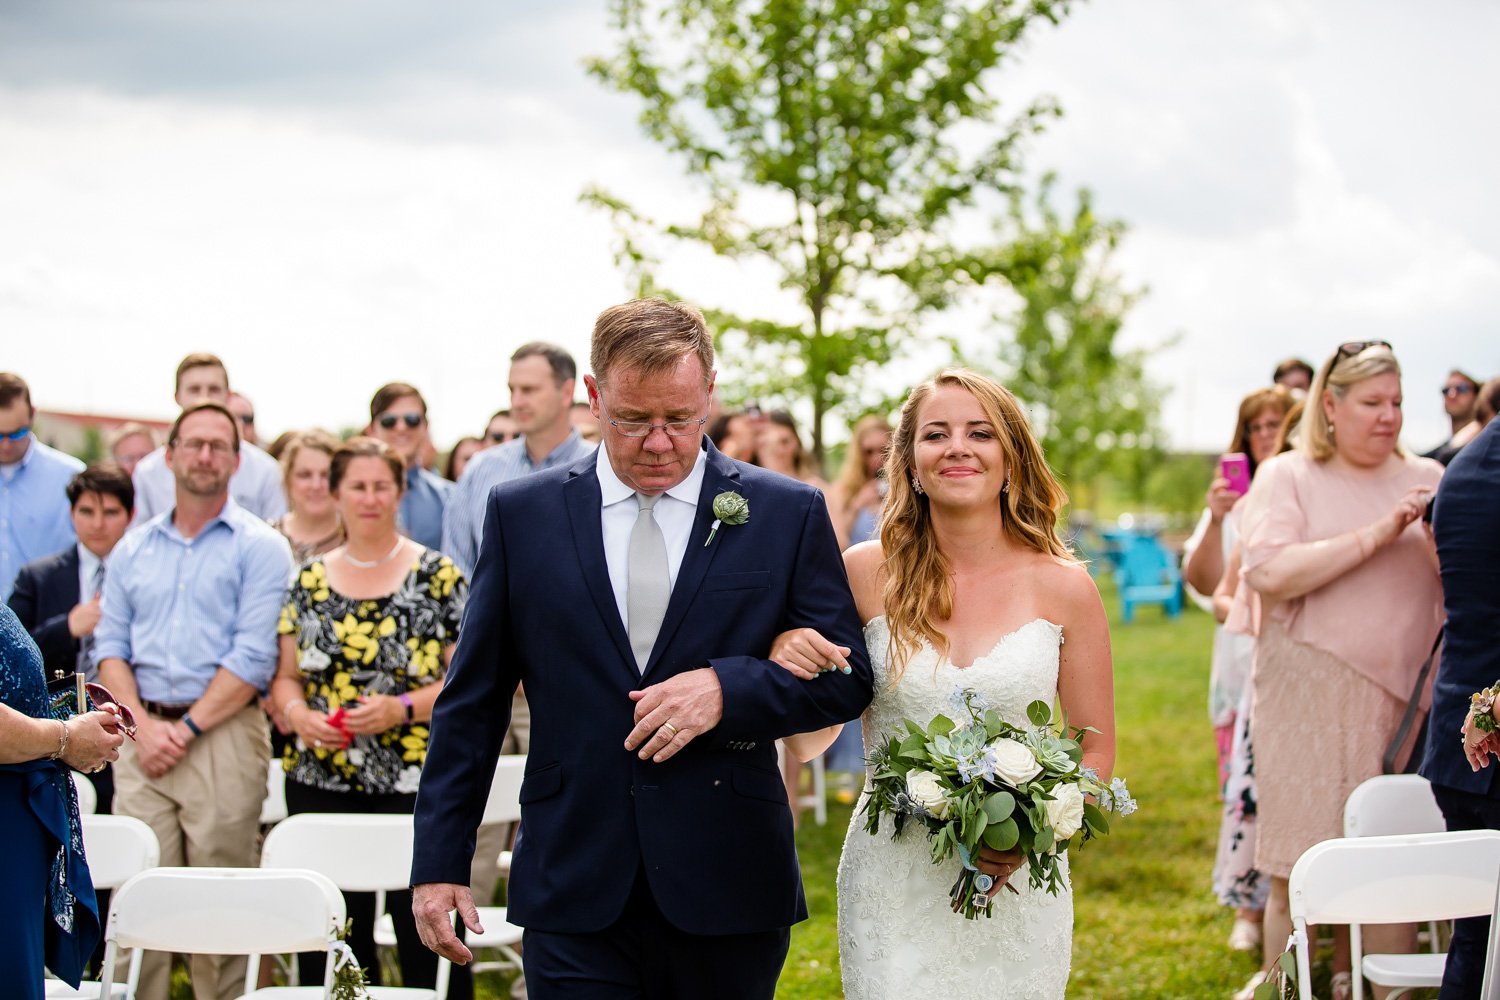 Father walks bride down aisle at outdoor wedding ceremony